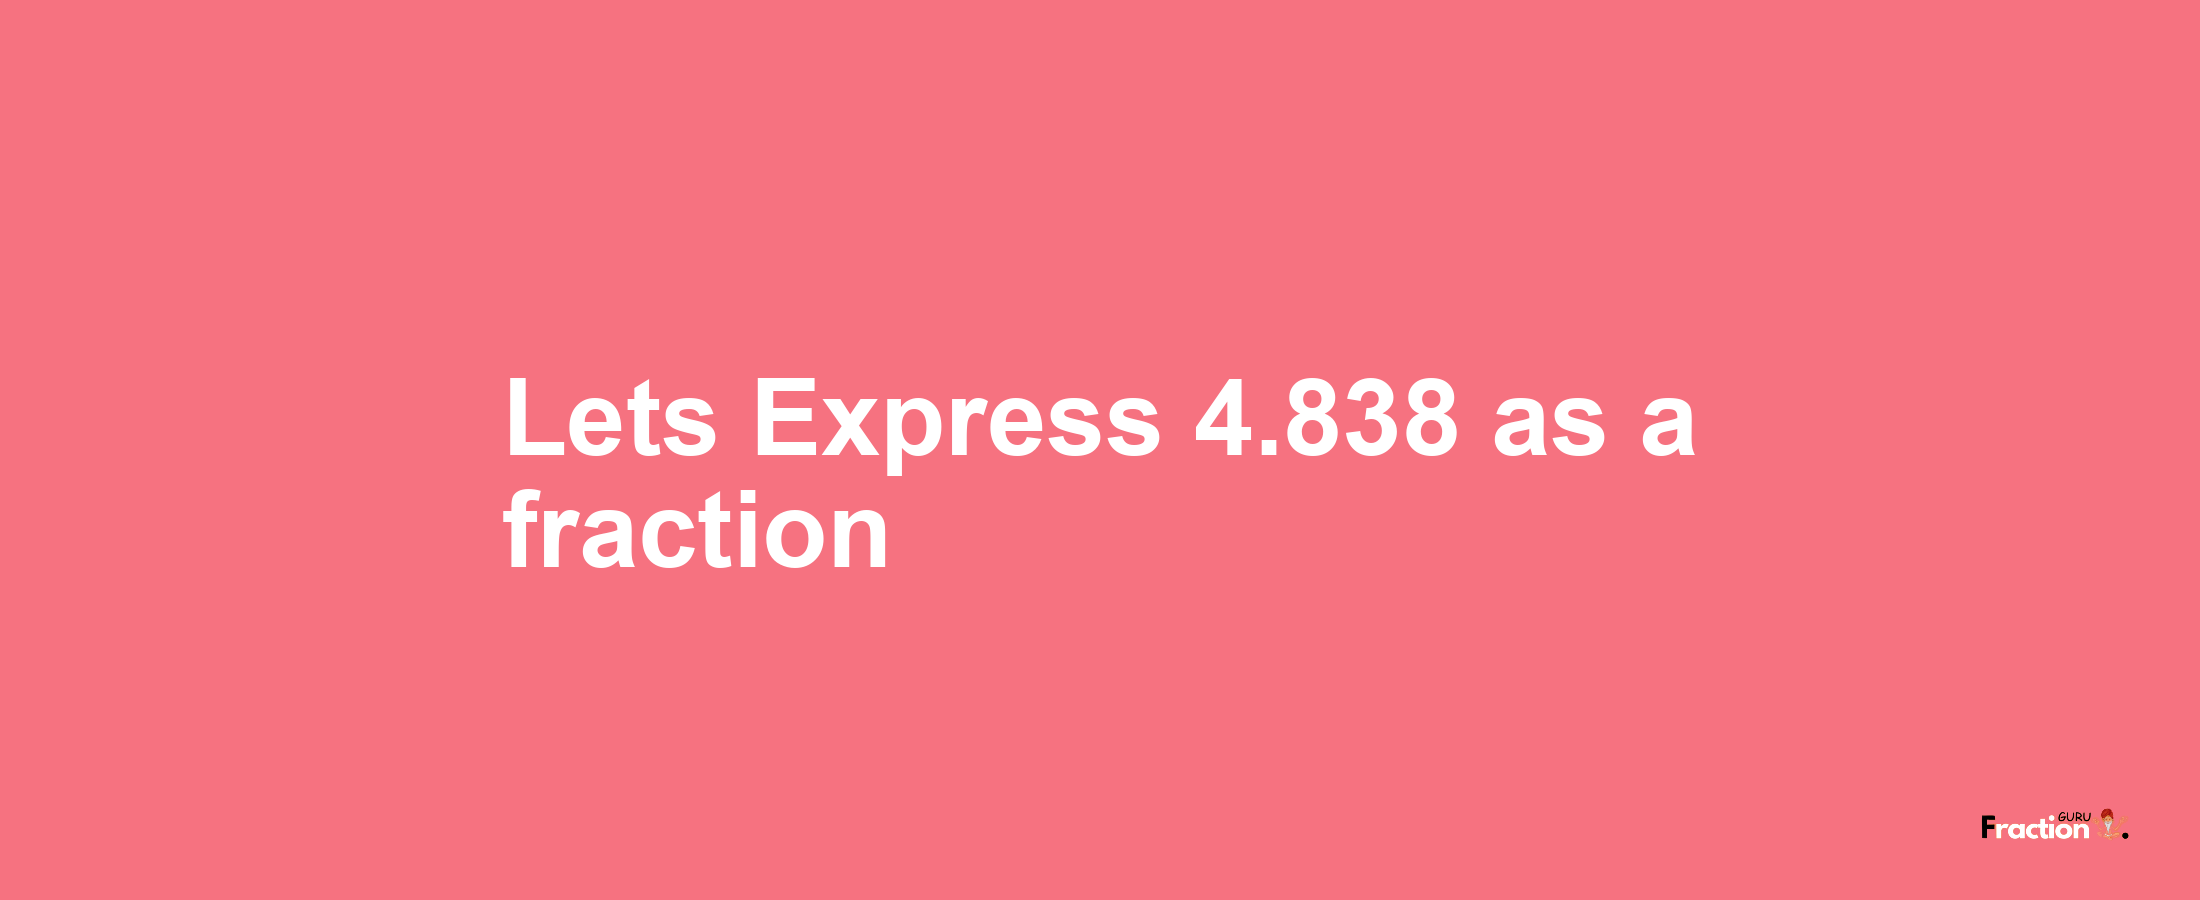 Lets Express 4.838 as afraction